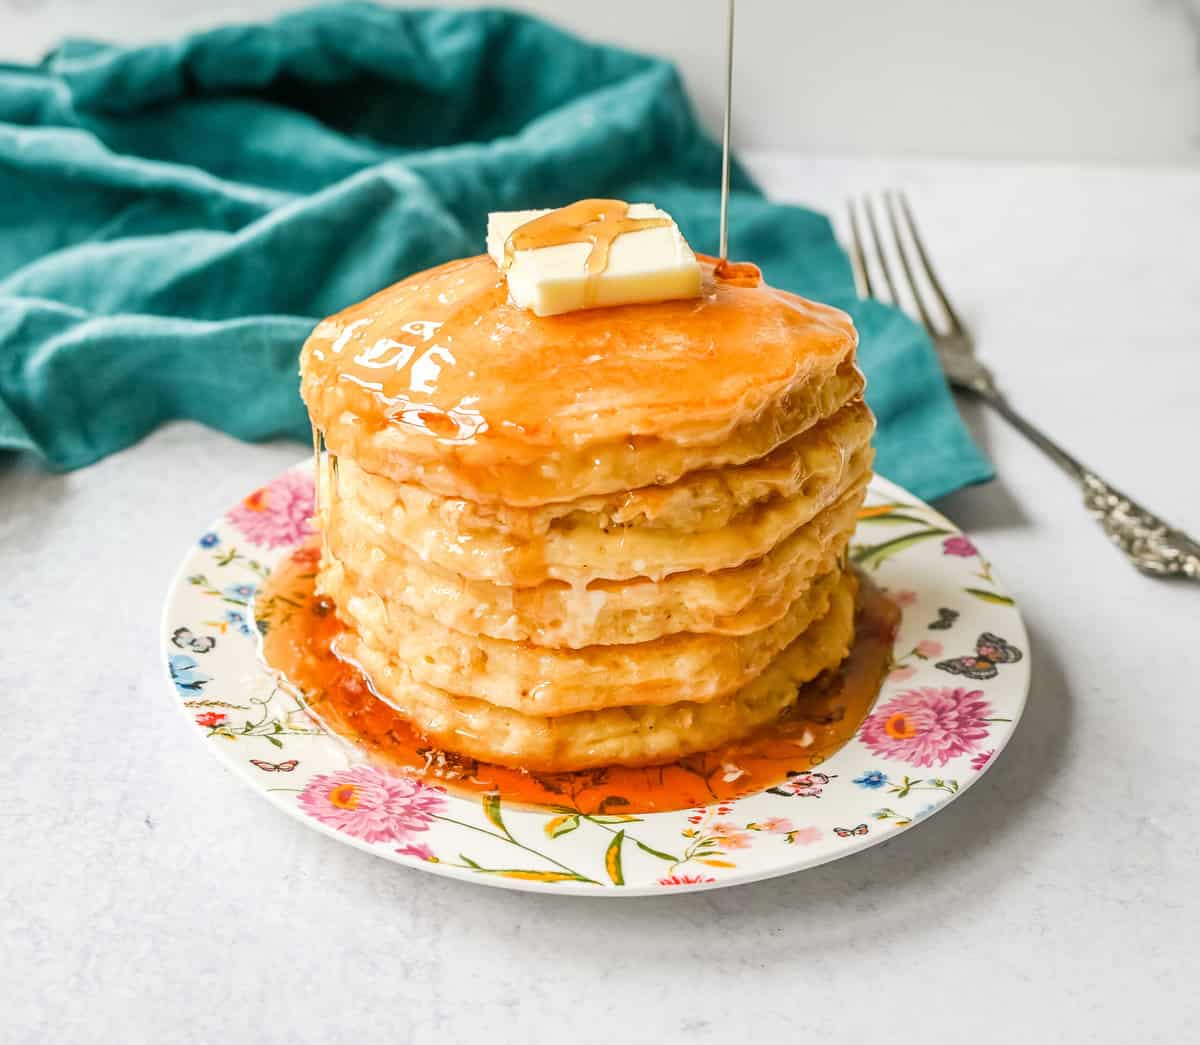 The Best Pancake Recipe. Light and fluffy buttermilk pancakes with a secret ingredient to make it extra tender. These sour cream pancakes are the only pancake recipe you will ever need!